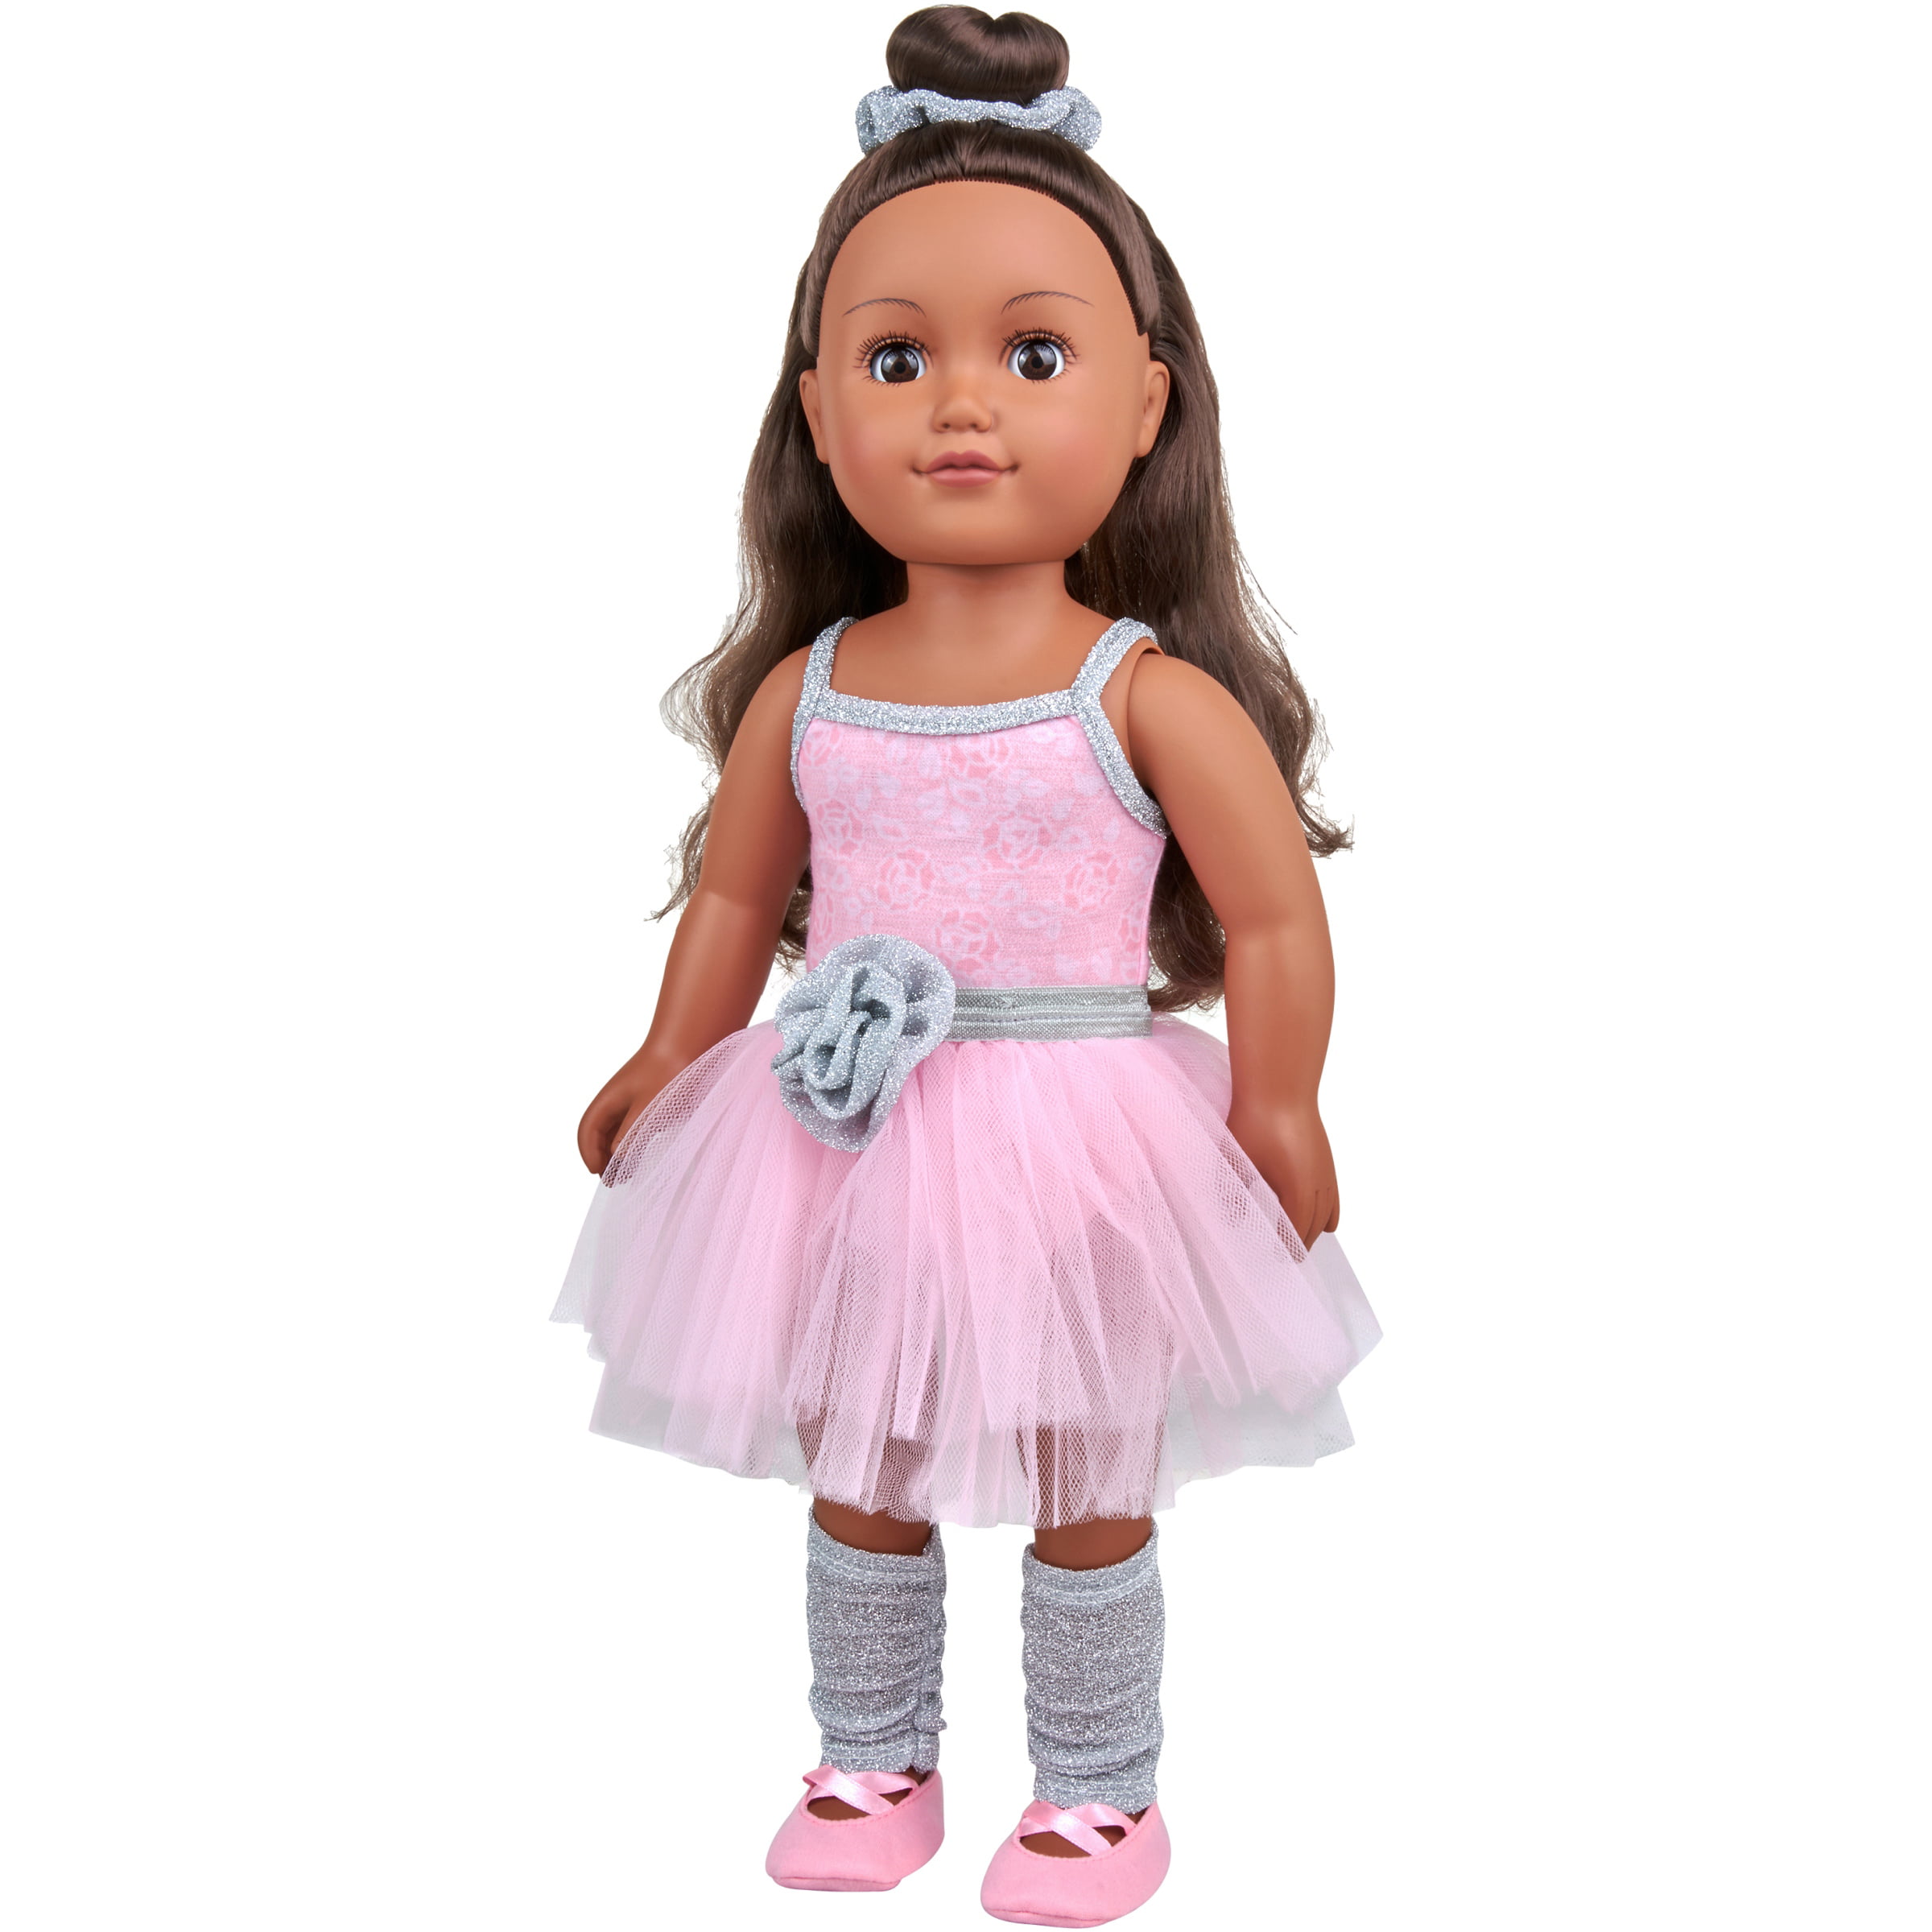 My Life As 18 Poseable Ballerina Doll African American